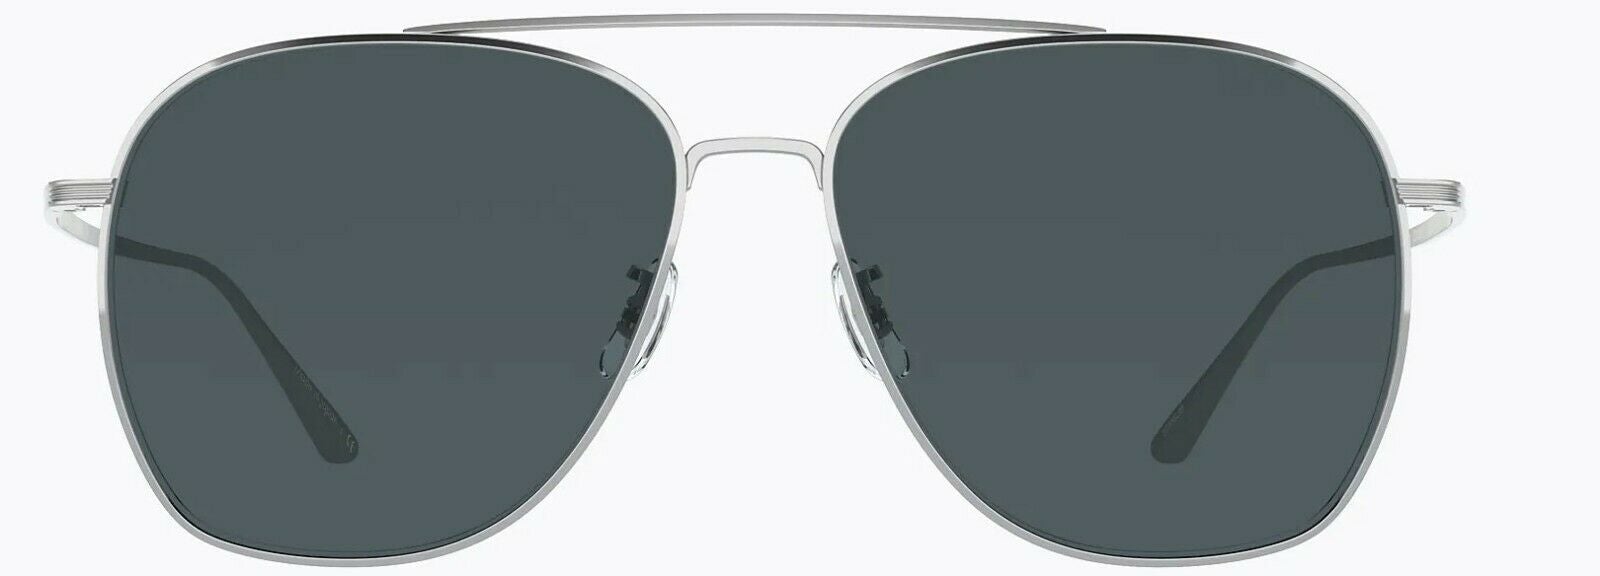 Oliver Peoples Sunglasses 1278ST 5036R5 The Row Ellerston Silver / Blue 58mm-827934450936-classypw.com-1